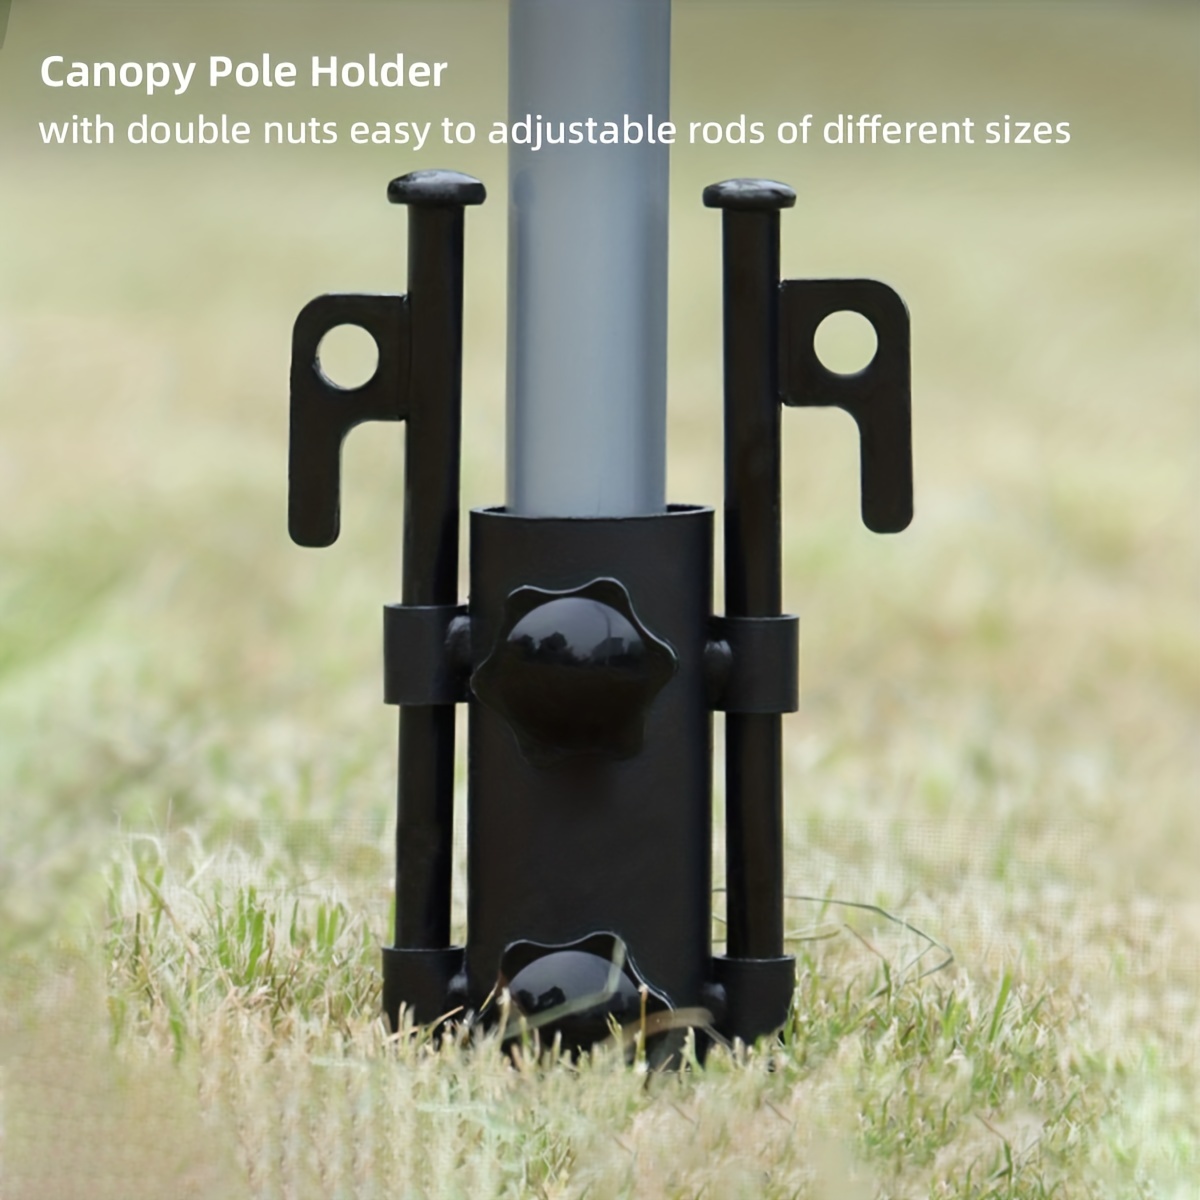 Canopy Pole Holder Adjustable Aperture Size With Without Nut